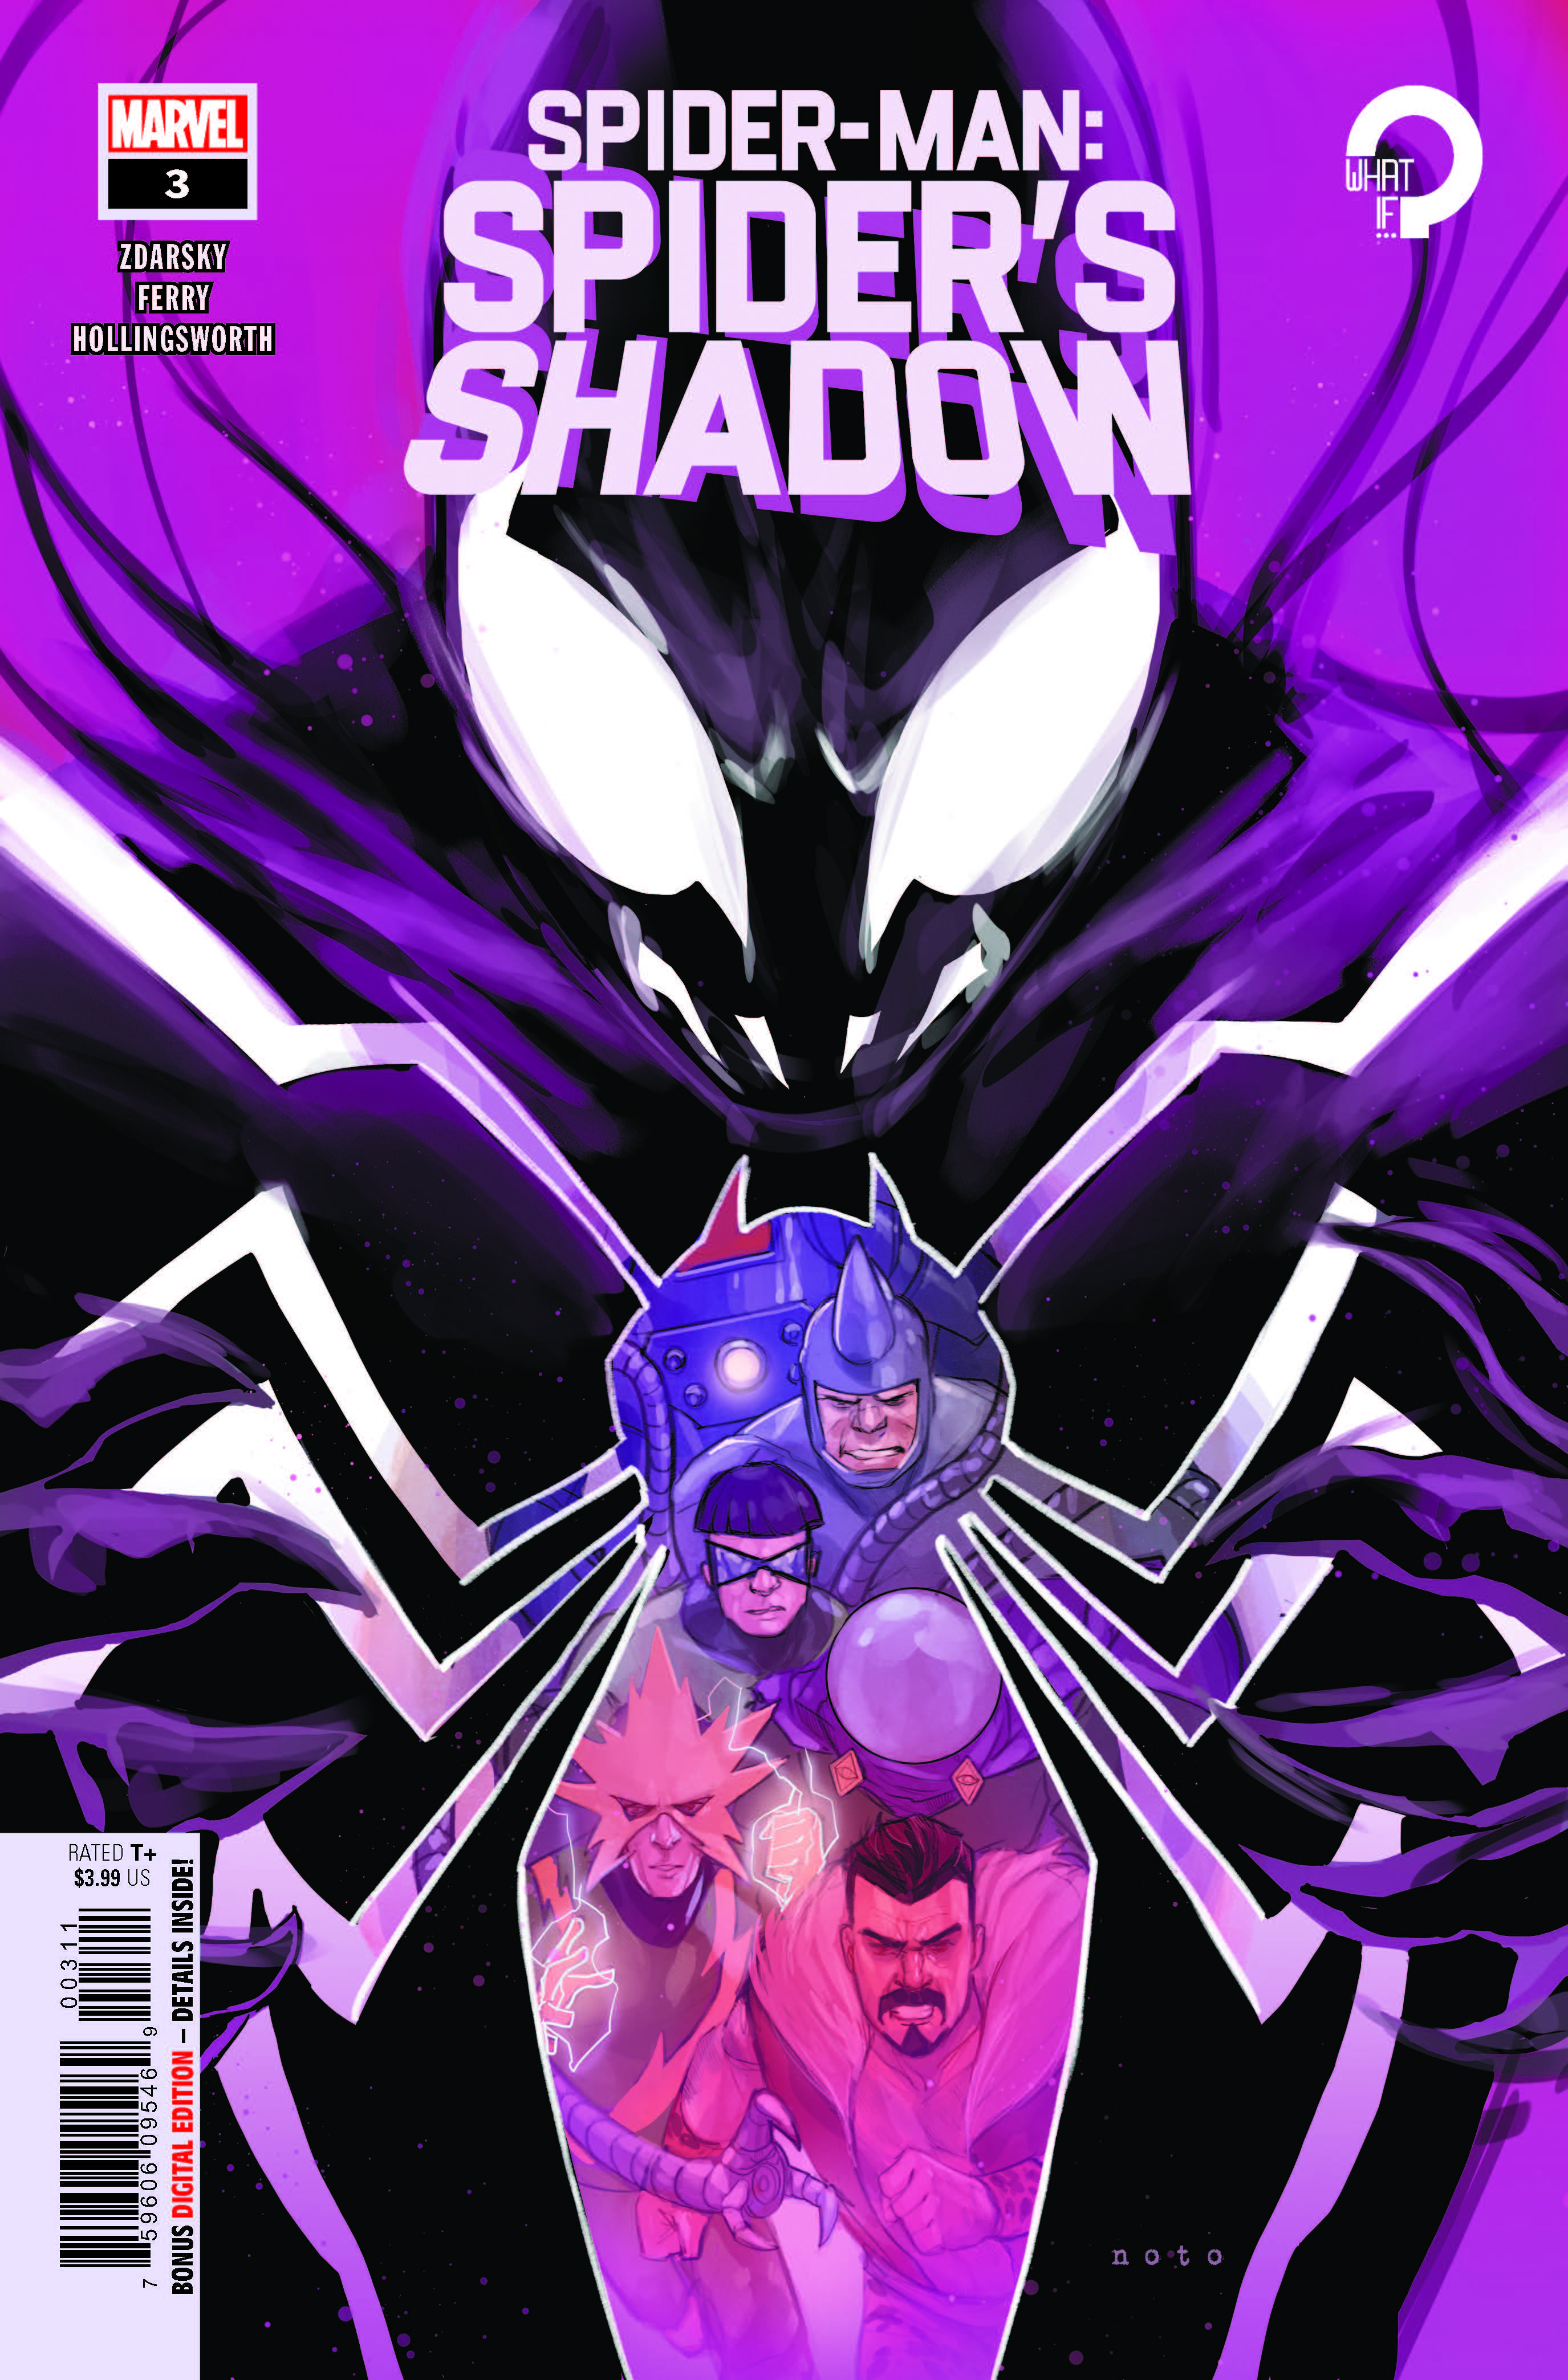 Spider-Man Spiders Shadow #3 (Of 4)